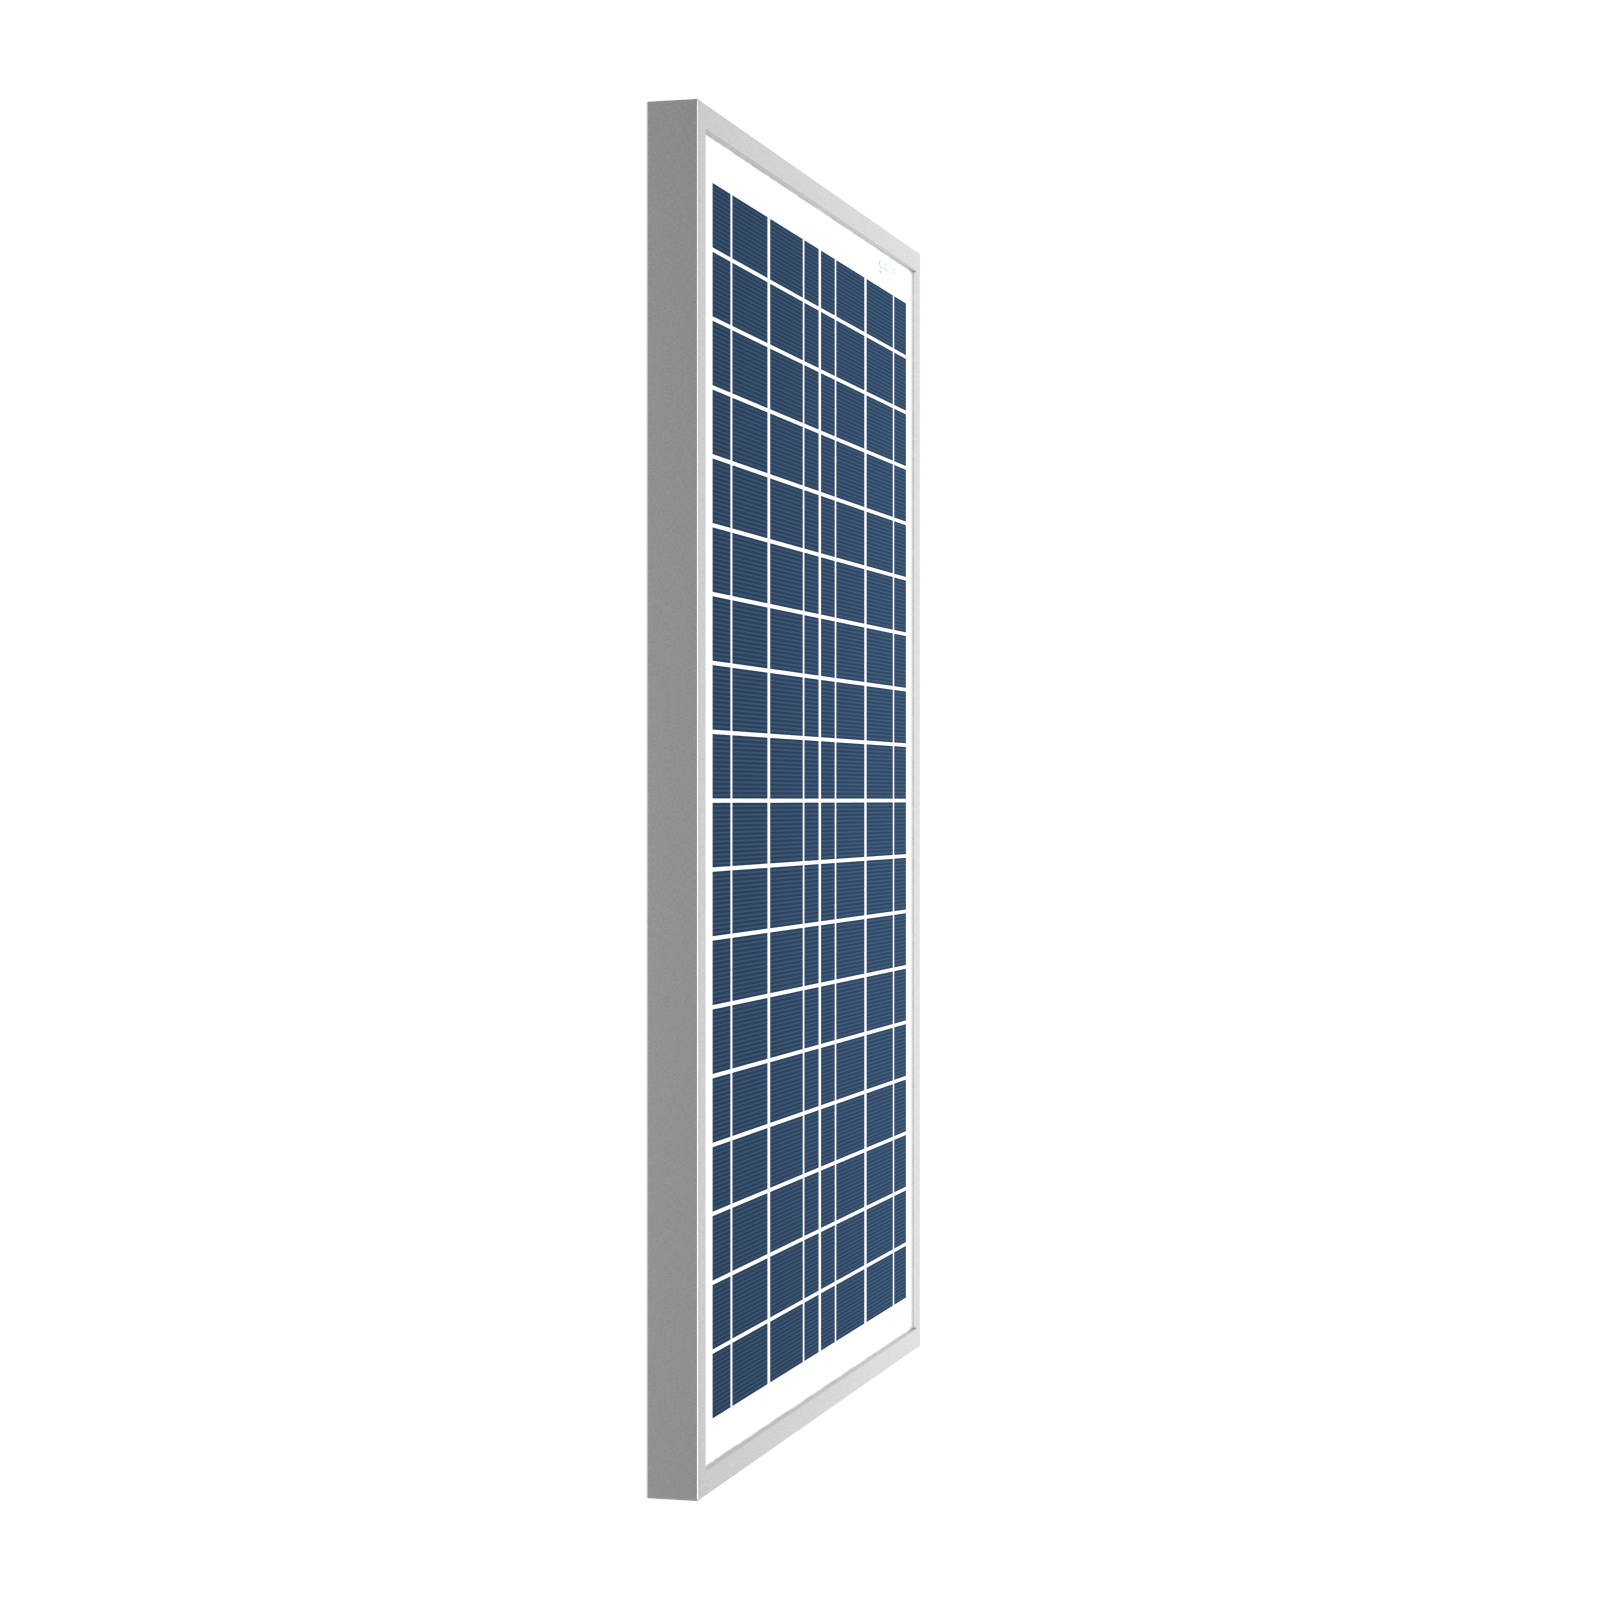 ACOPower 25 Watts Polycrystalline Solar Panel, for 12 Volt Battery Charger